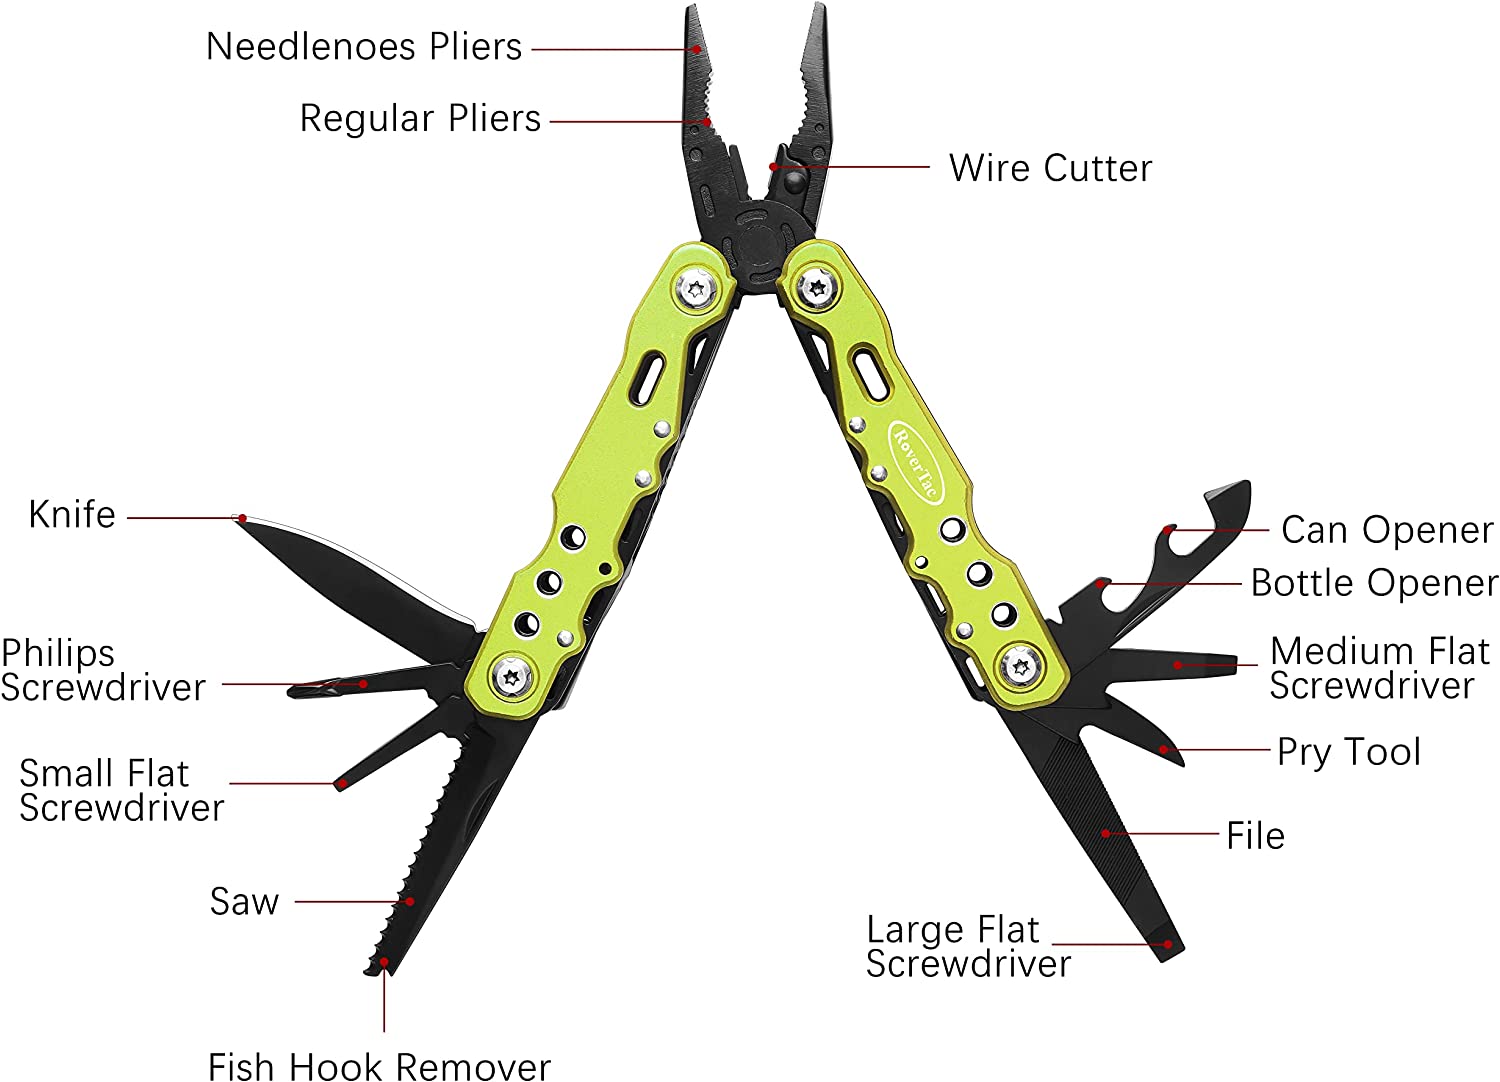 14-in-1 Multitool Pliers-Green Screwdrivers Saw Bottle Opener Perfect for Camping Survival Hiking Repairs